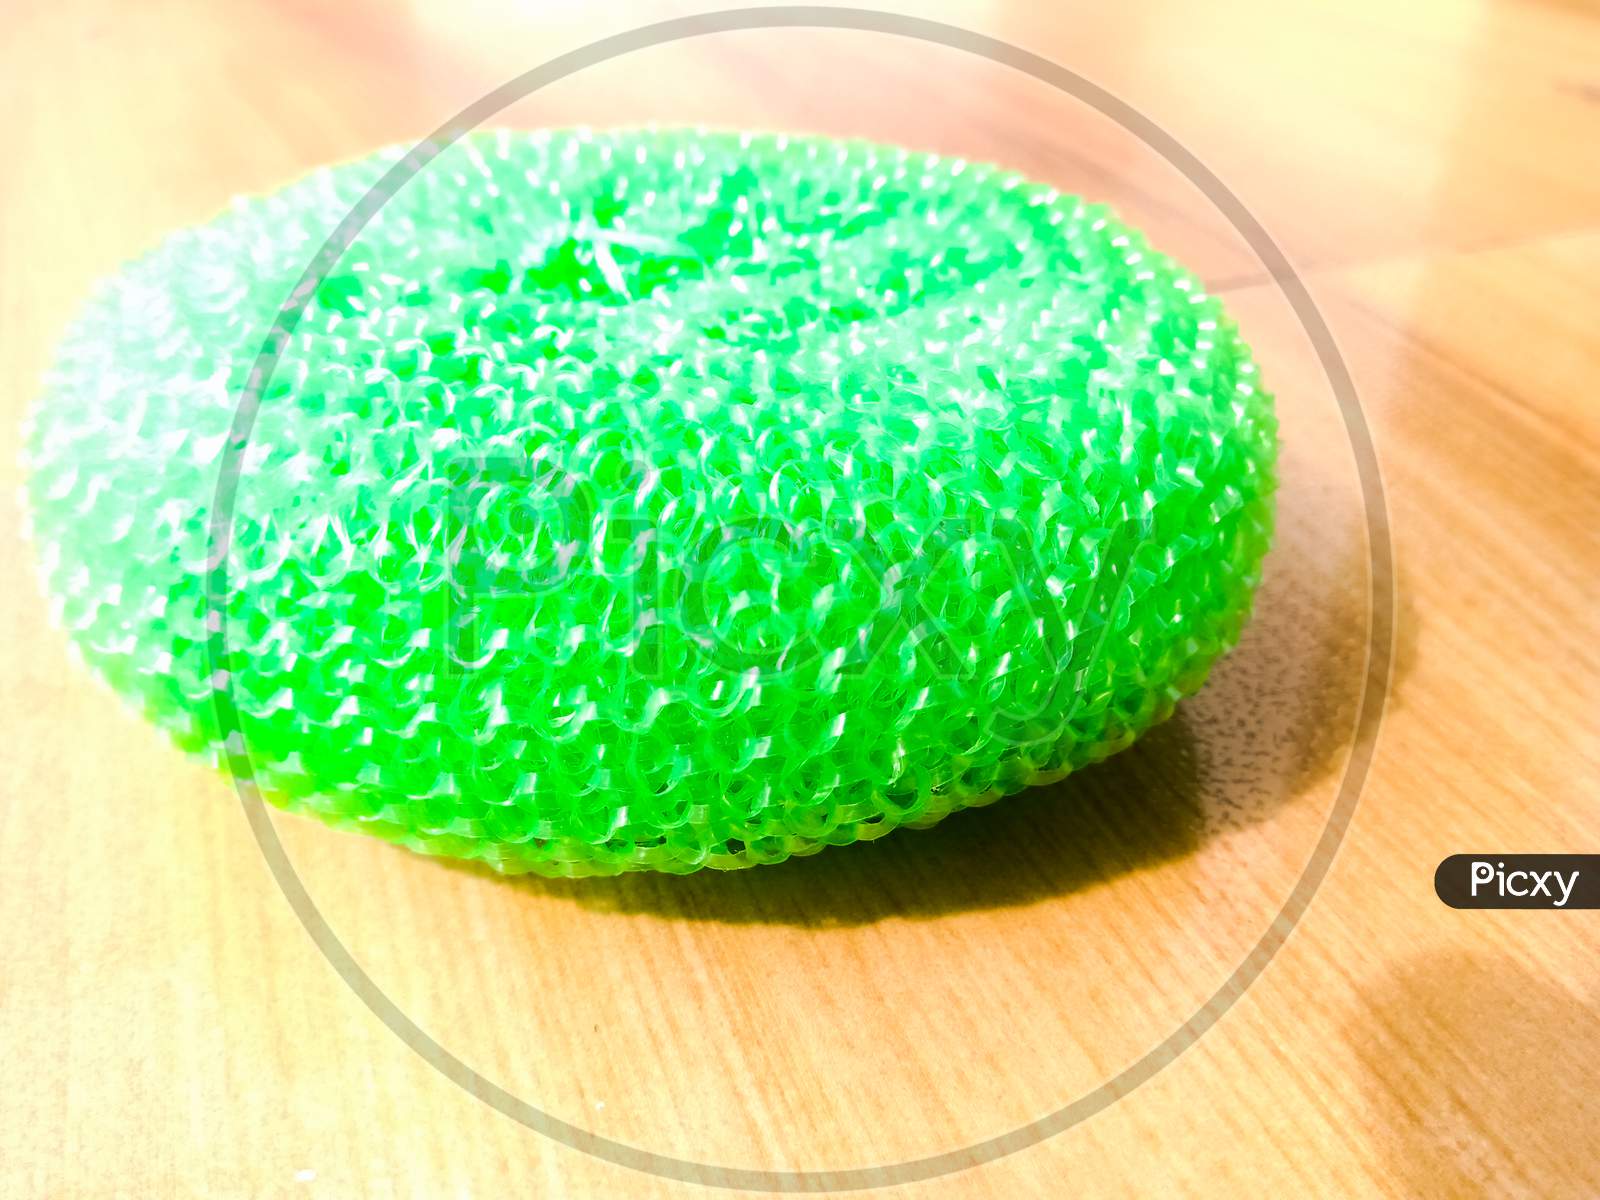 A Green Plastic Scrubber Placed On The Floor.